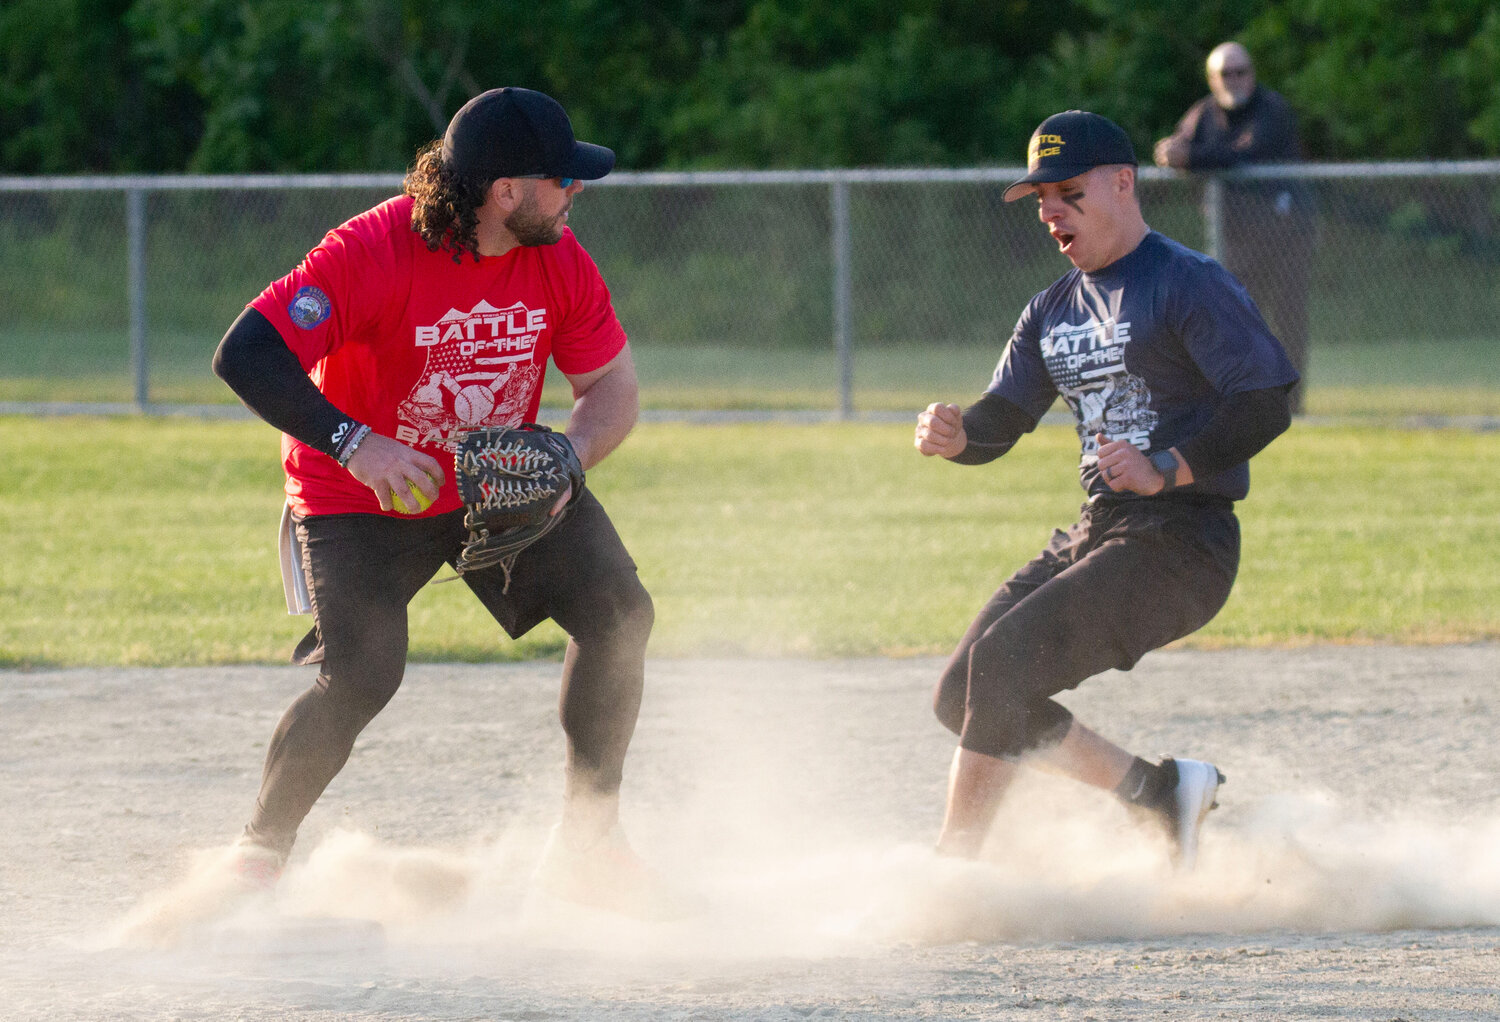 Shortstop Dan Coffland attempts to make an out at second base.